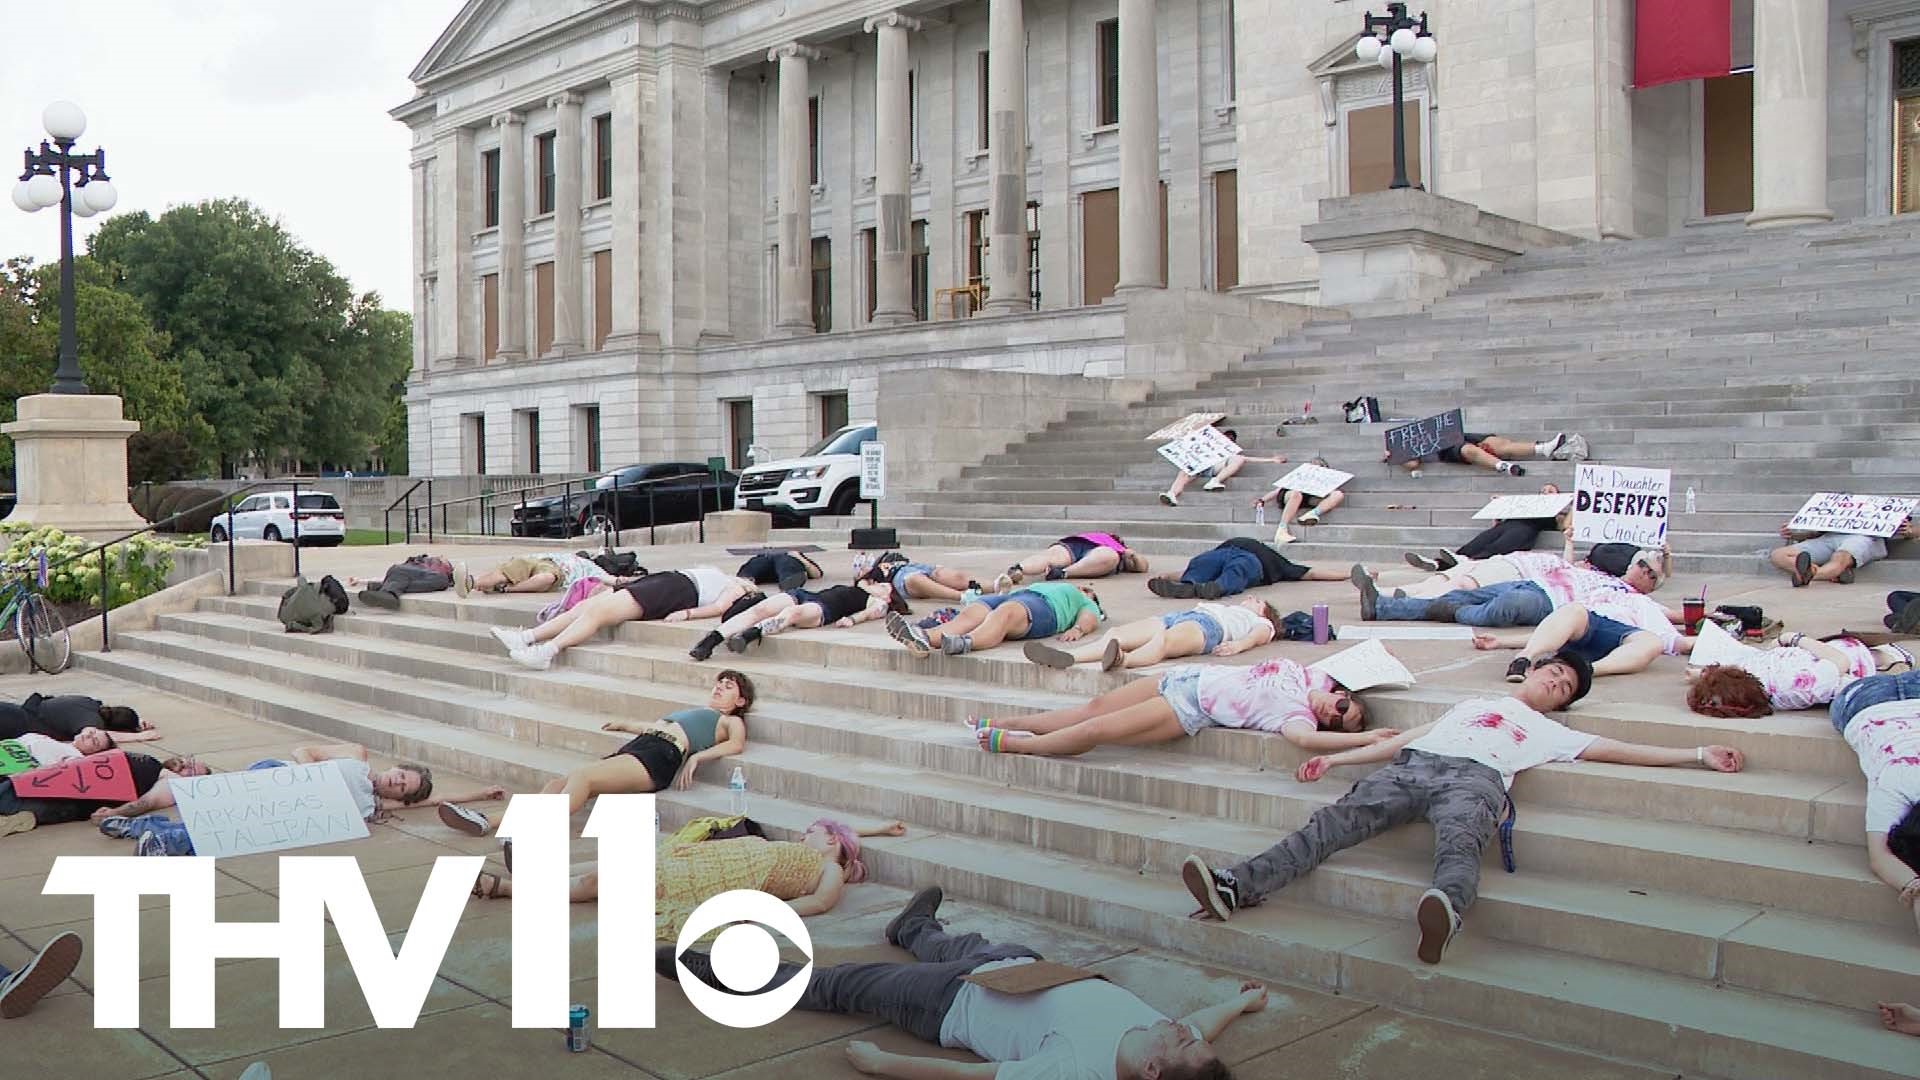 Many Arkansans participated in a die-in on Saturday as the weeklong protests continued in the wake of Roe v. Wade being overturned.